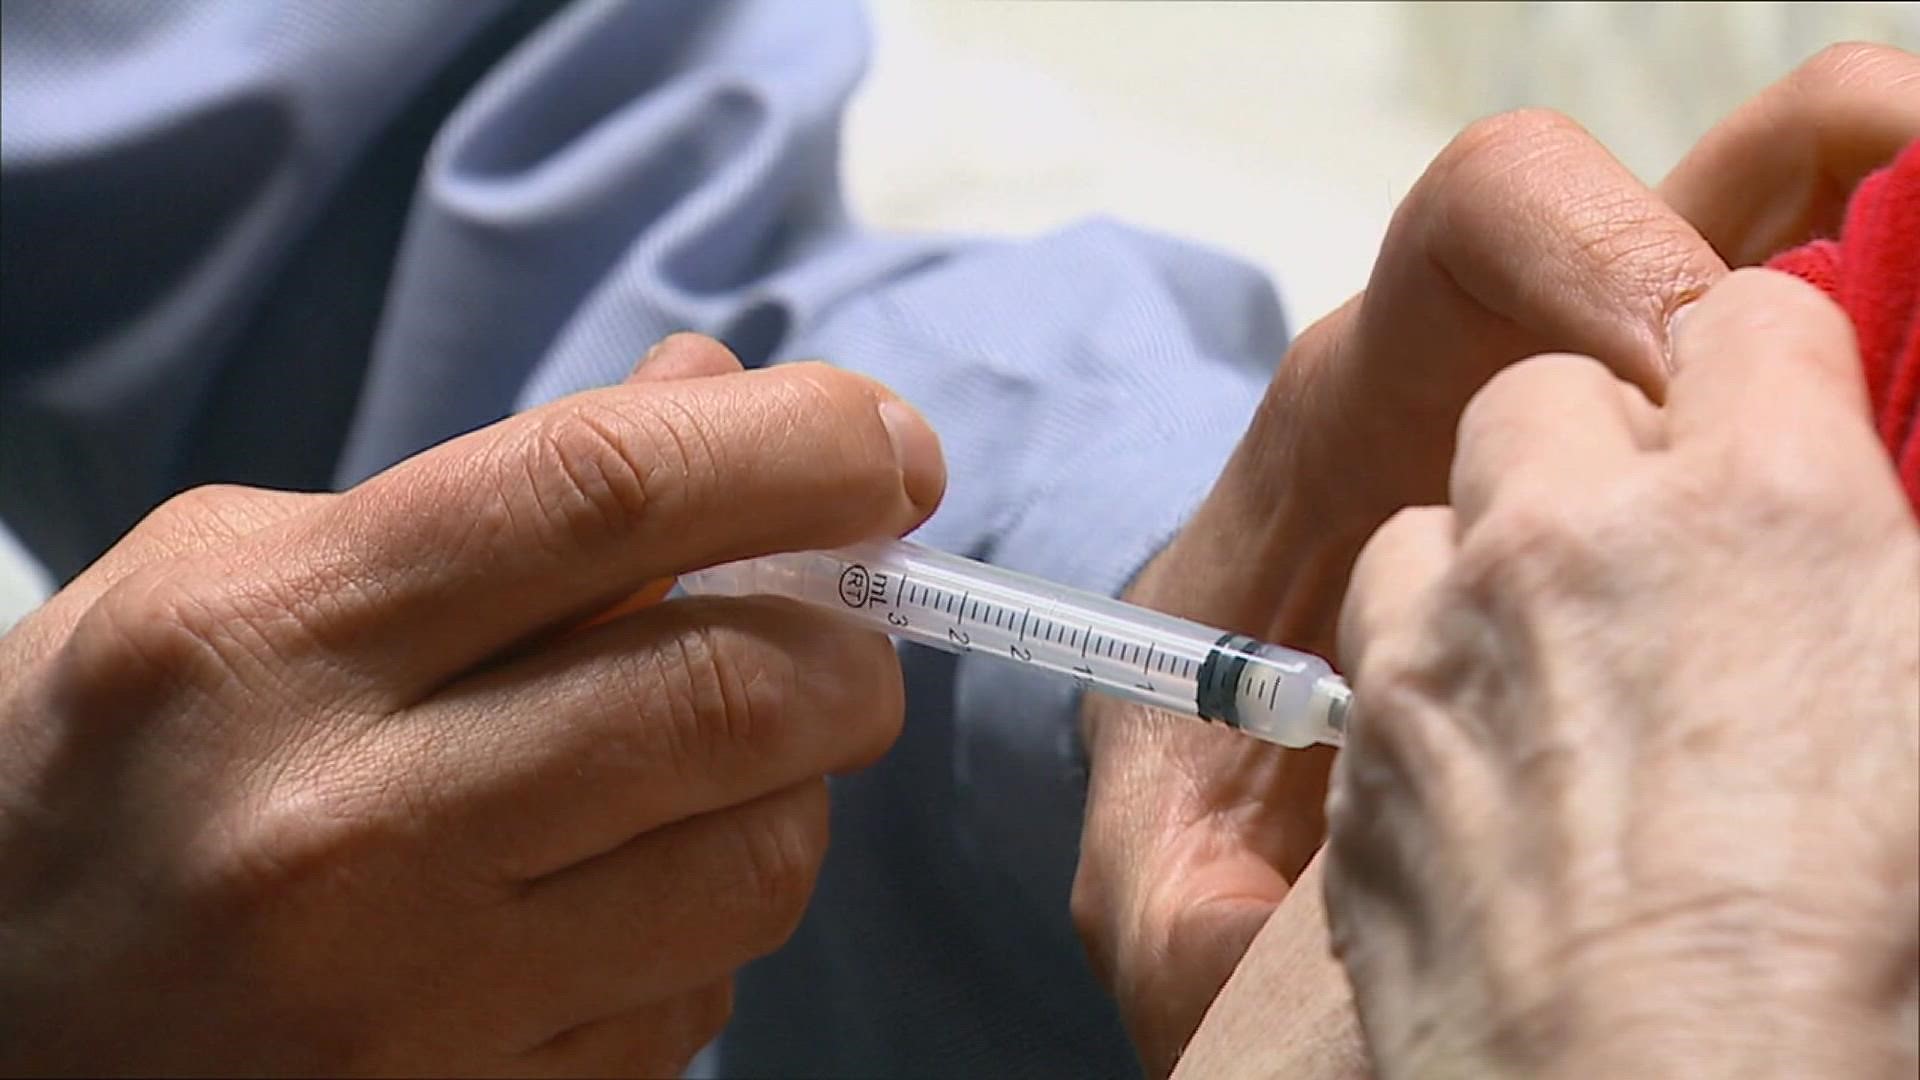 With booster and child vaccine approval seemingly on the horizon, Rock Island County is gearing up for another round of shots.